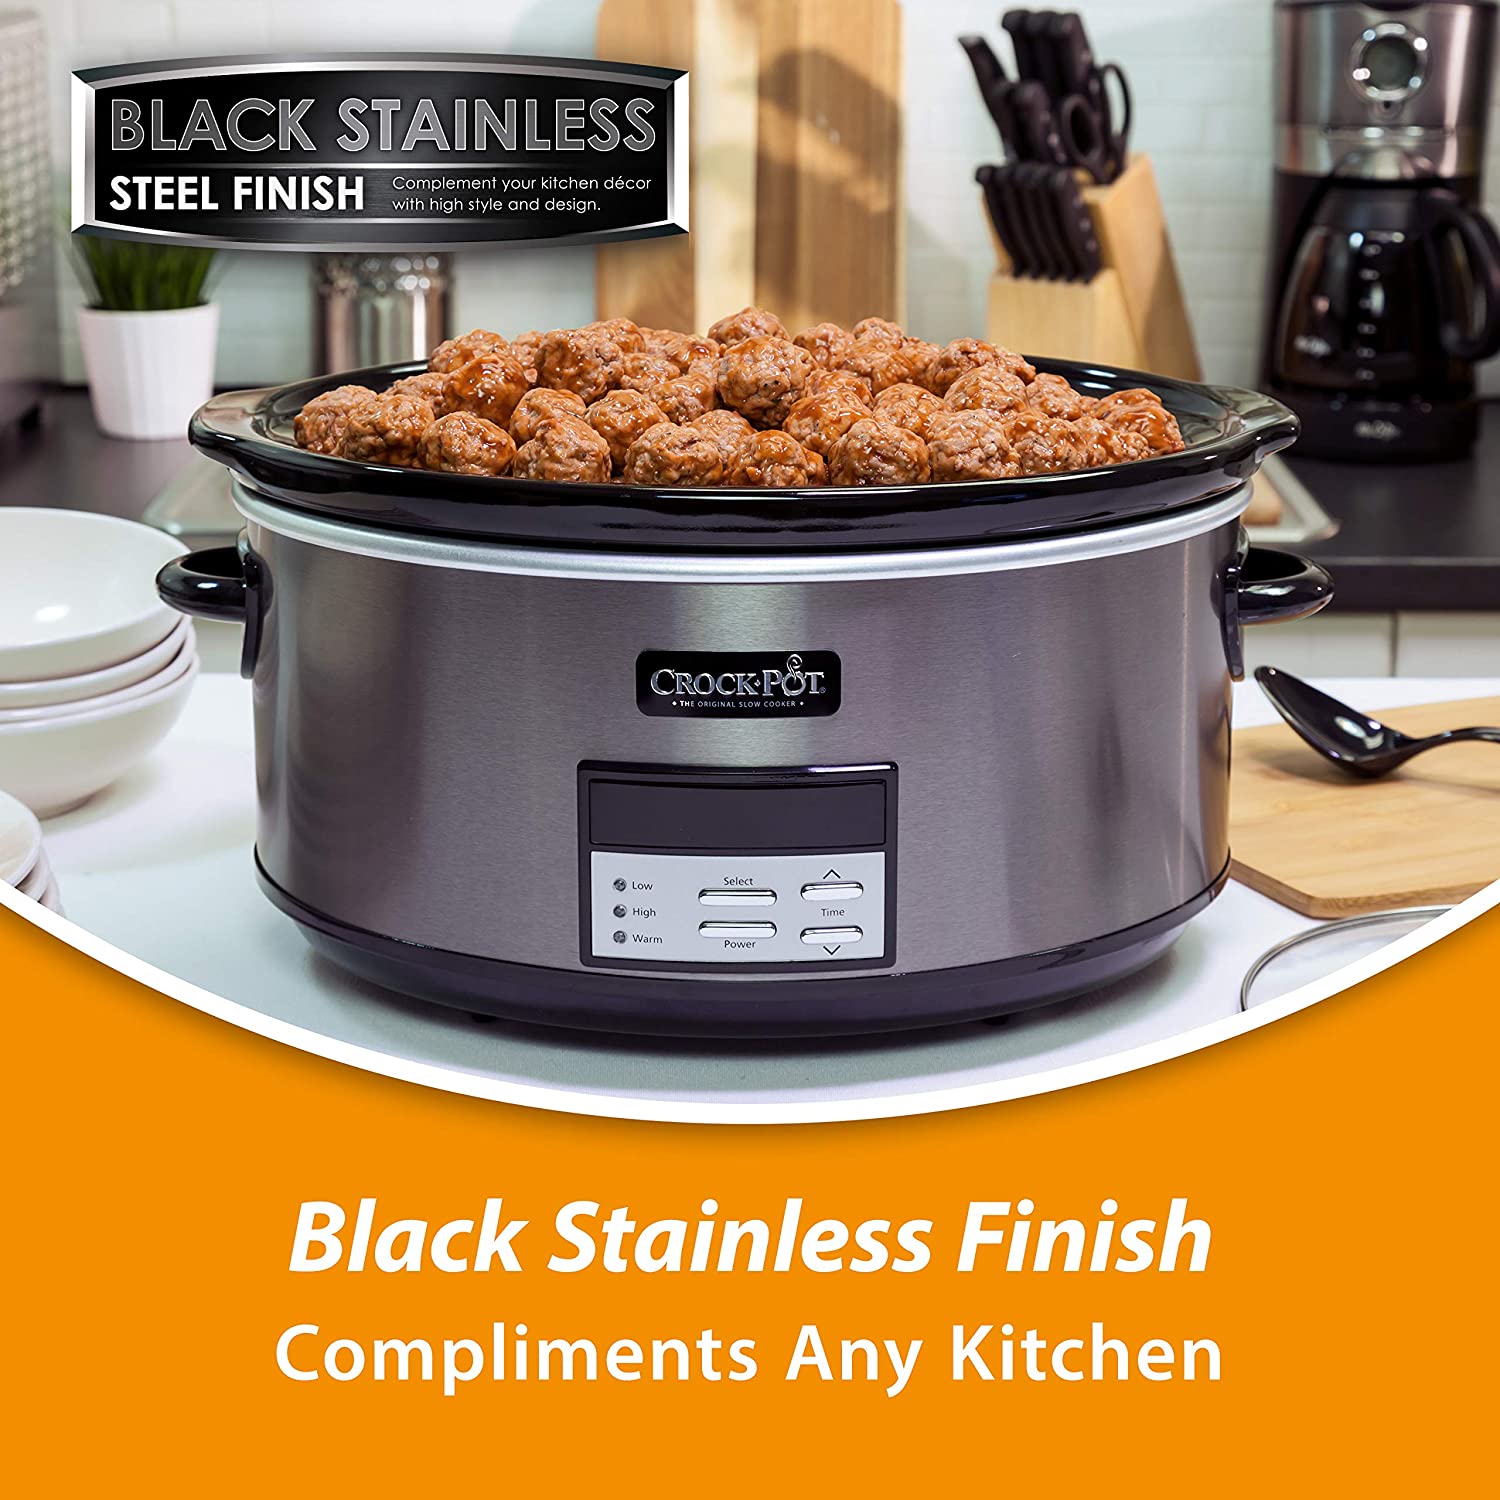 https://bigbigmart.com/wp-content/uploads/2023/03/Crock-Pot-8-Quart-Slow-Cooker-with-Auto-Warm-Setting-and-Cookbook-Black-Stainless-Steel7.jpg